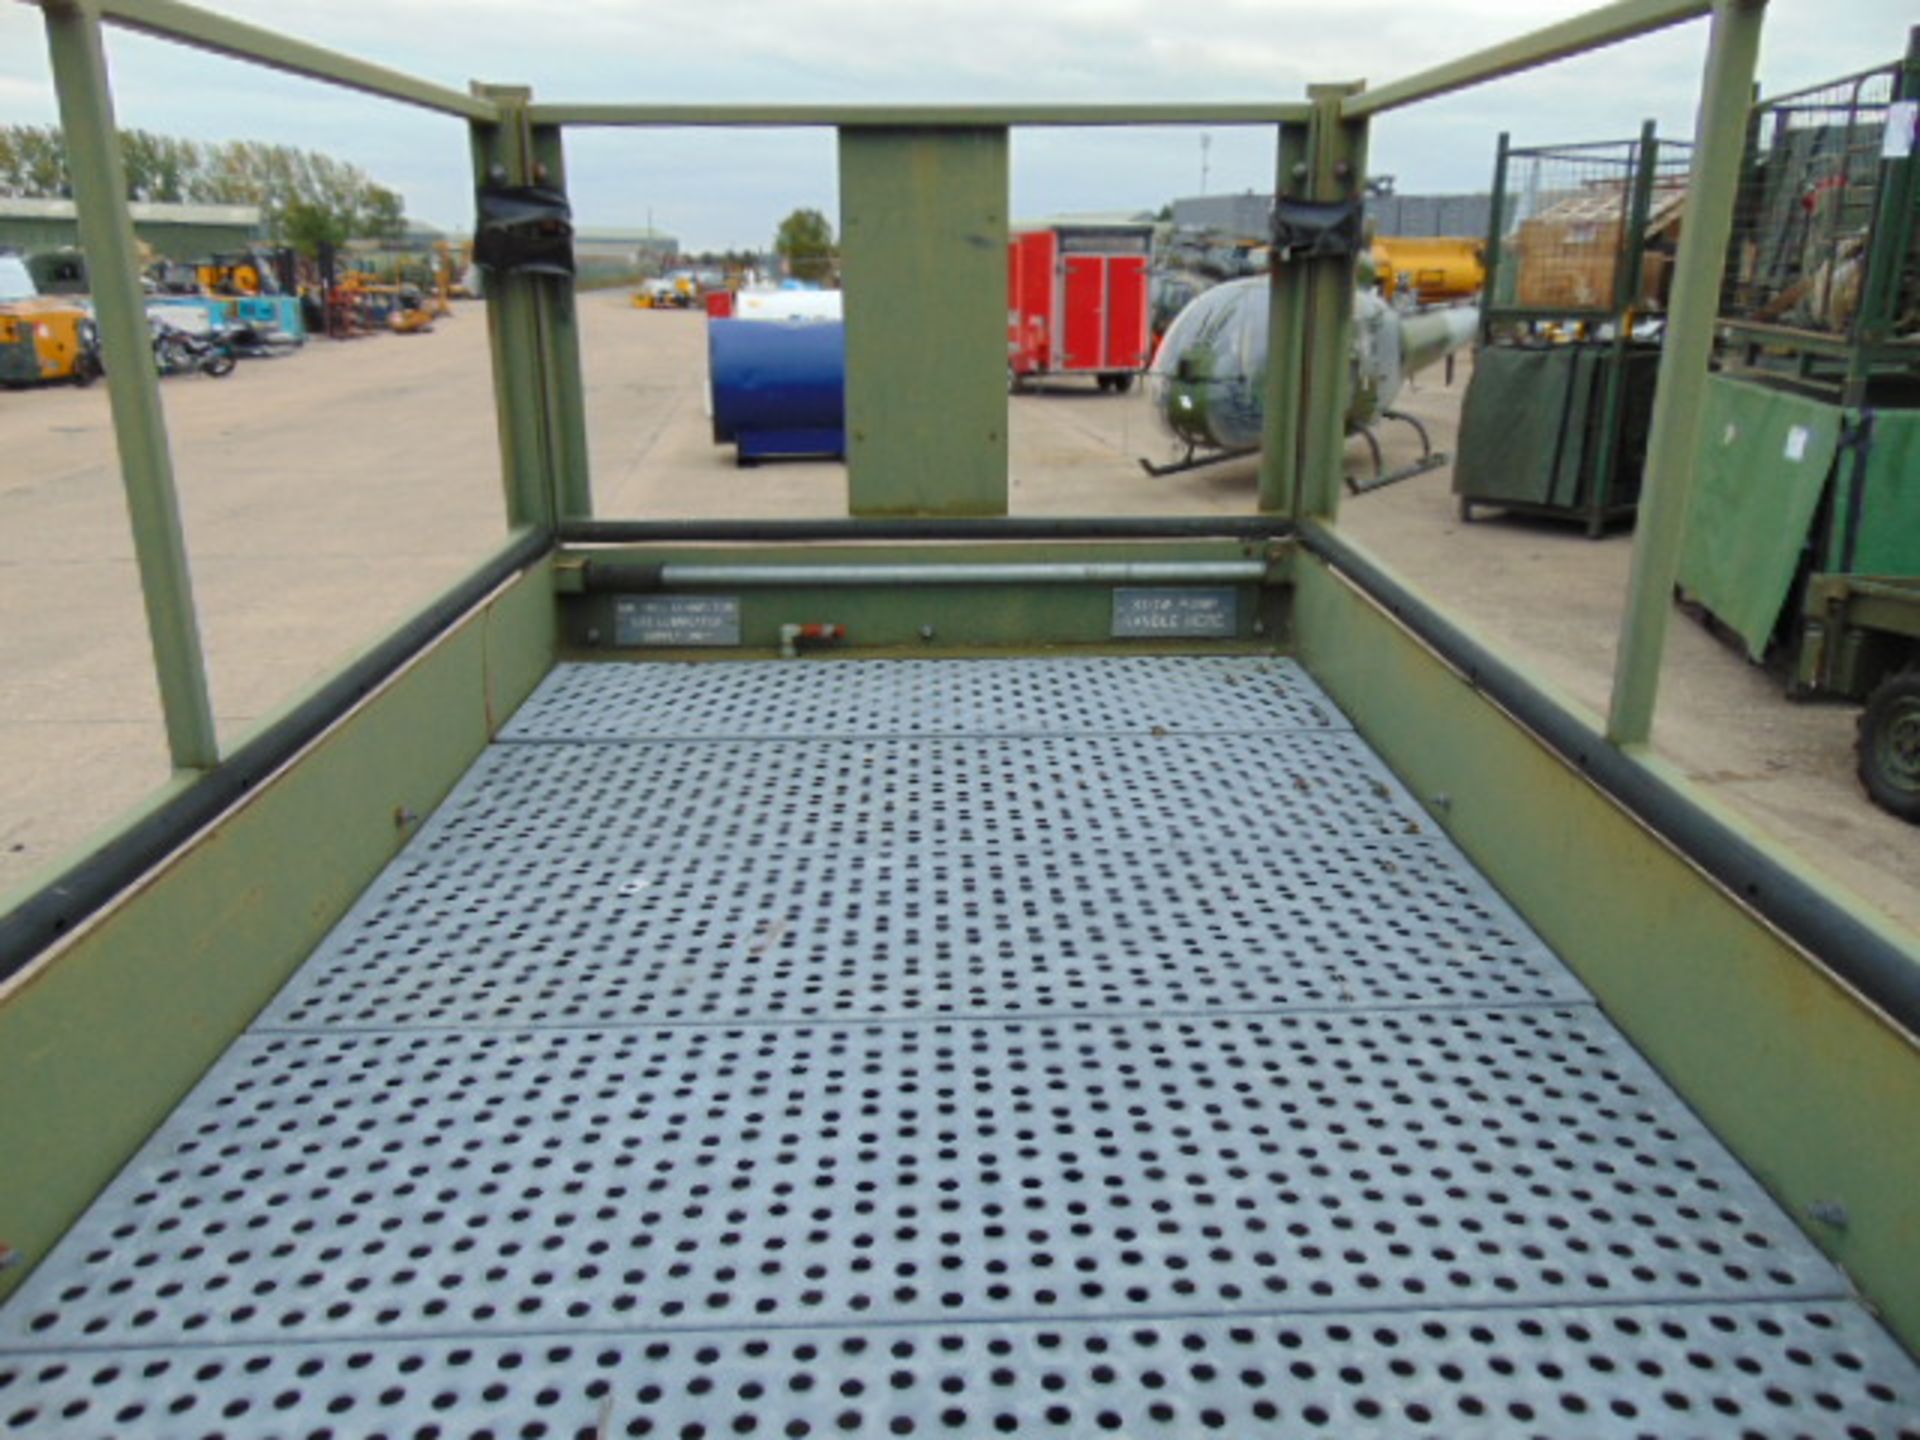 UK Lift Aircraft Hydraulic Access Platform from RAF as Shown - Image 10 of 11